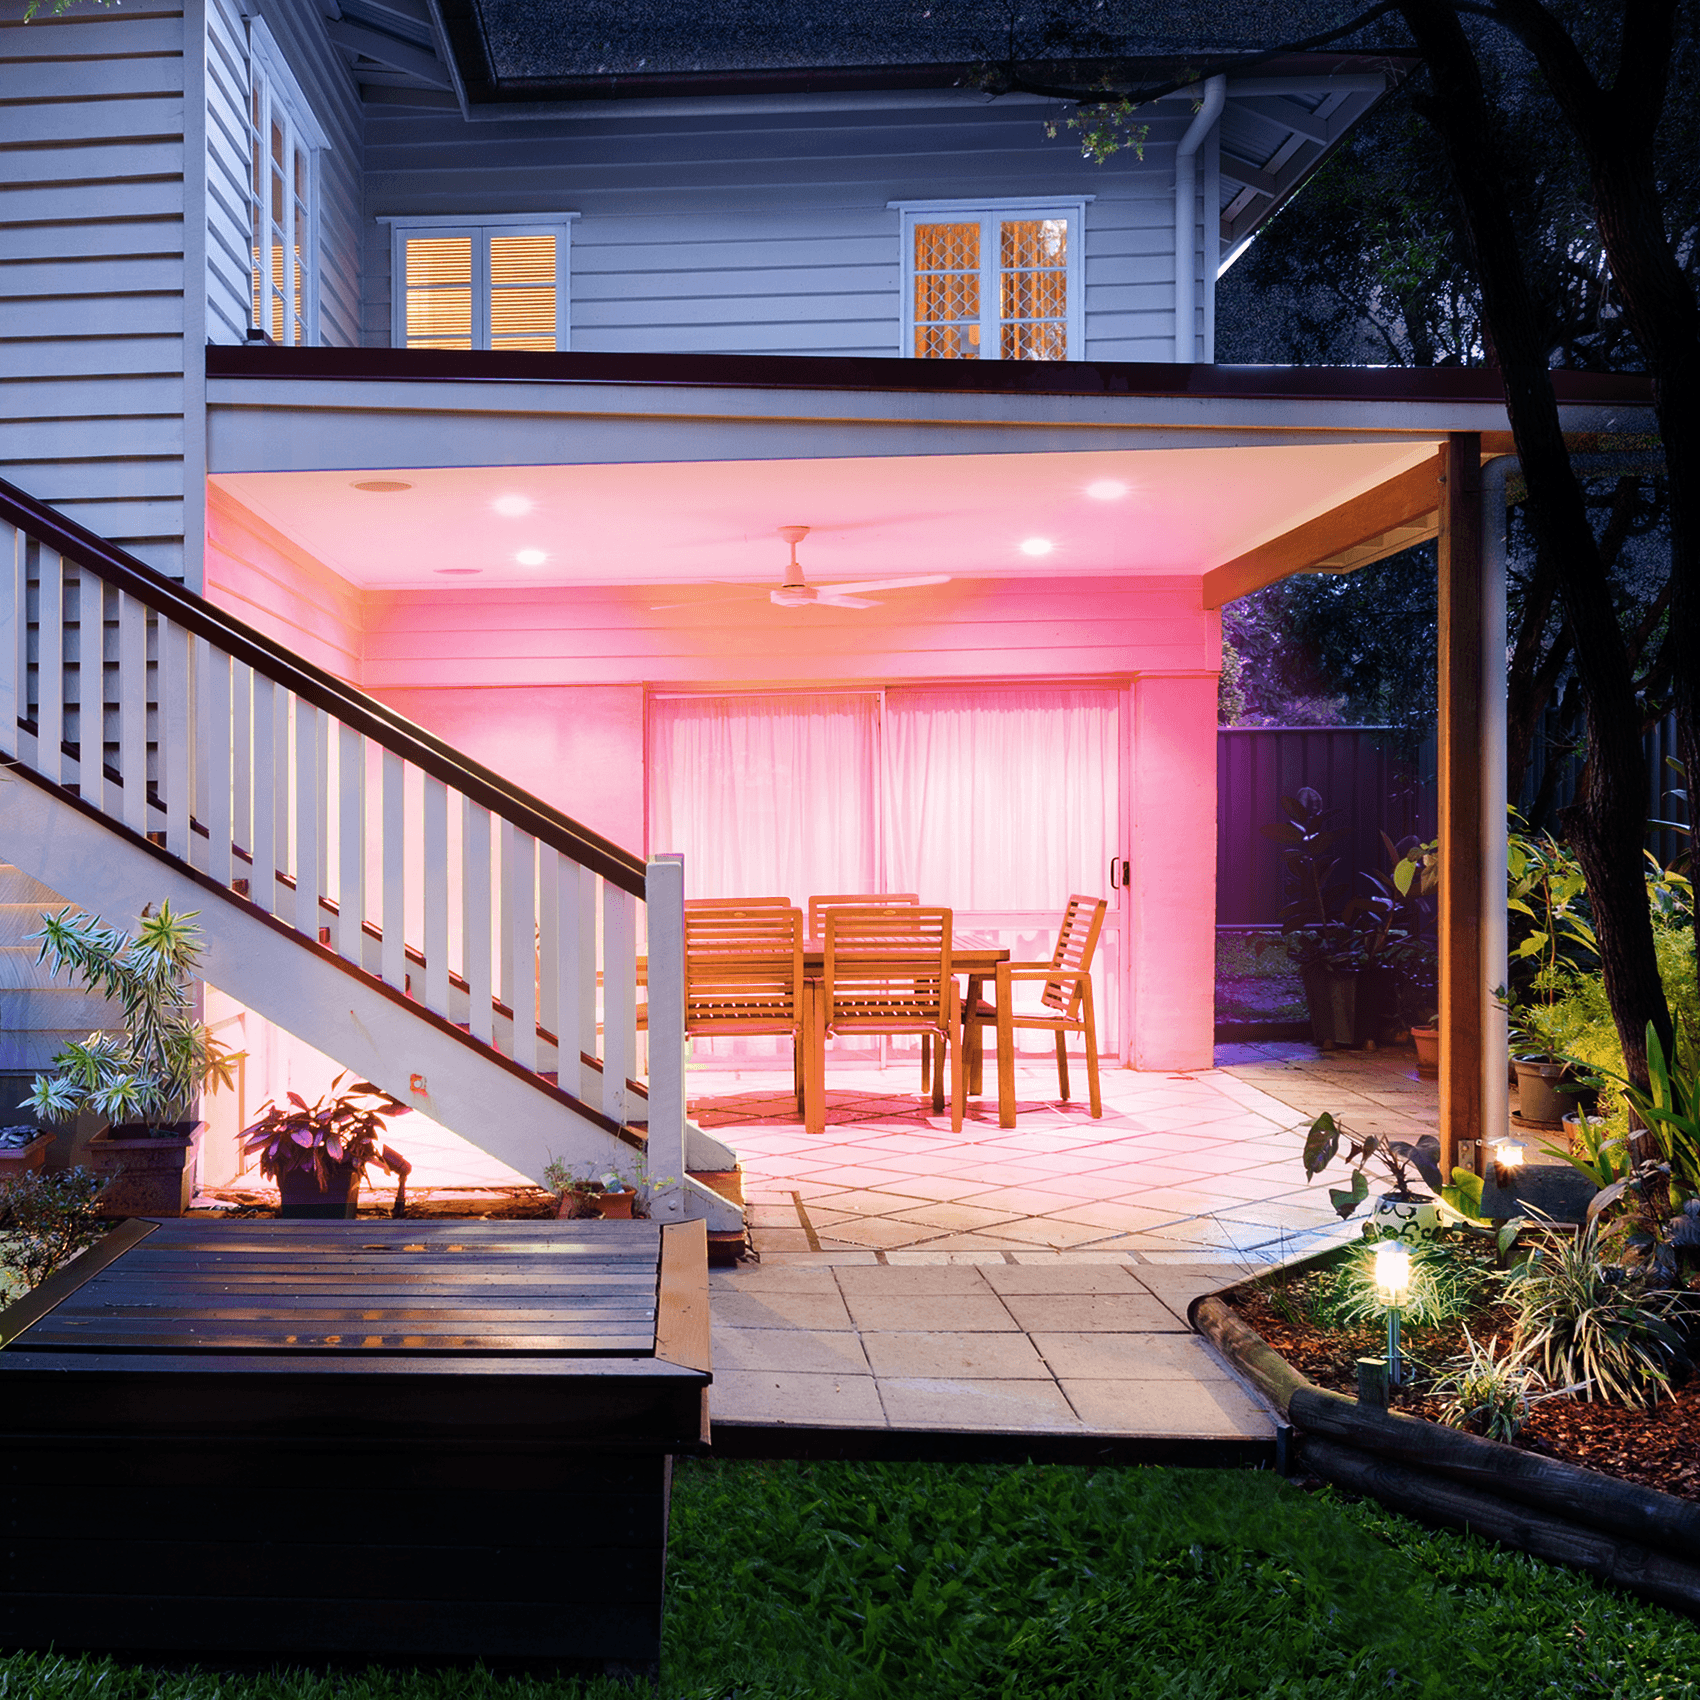 a well lit patio area in a garden next to a house